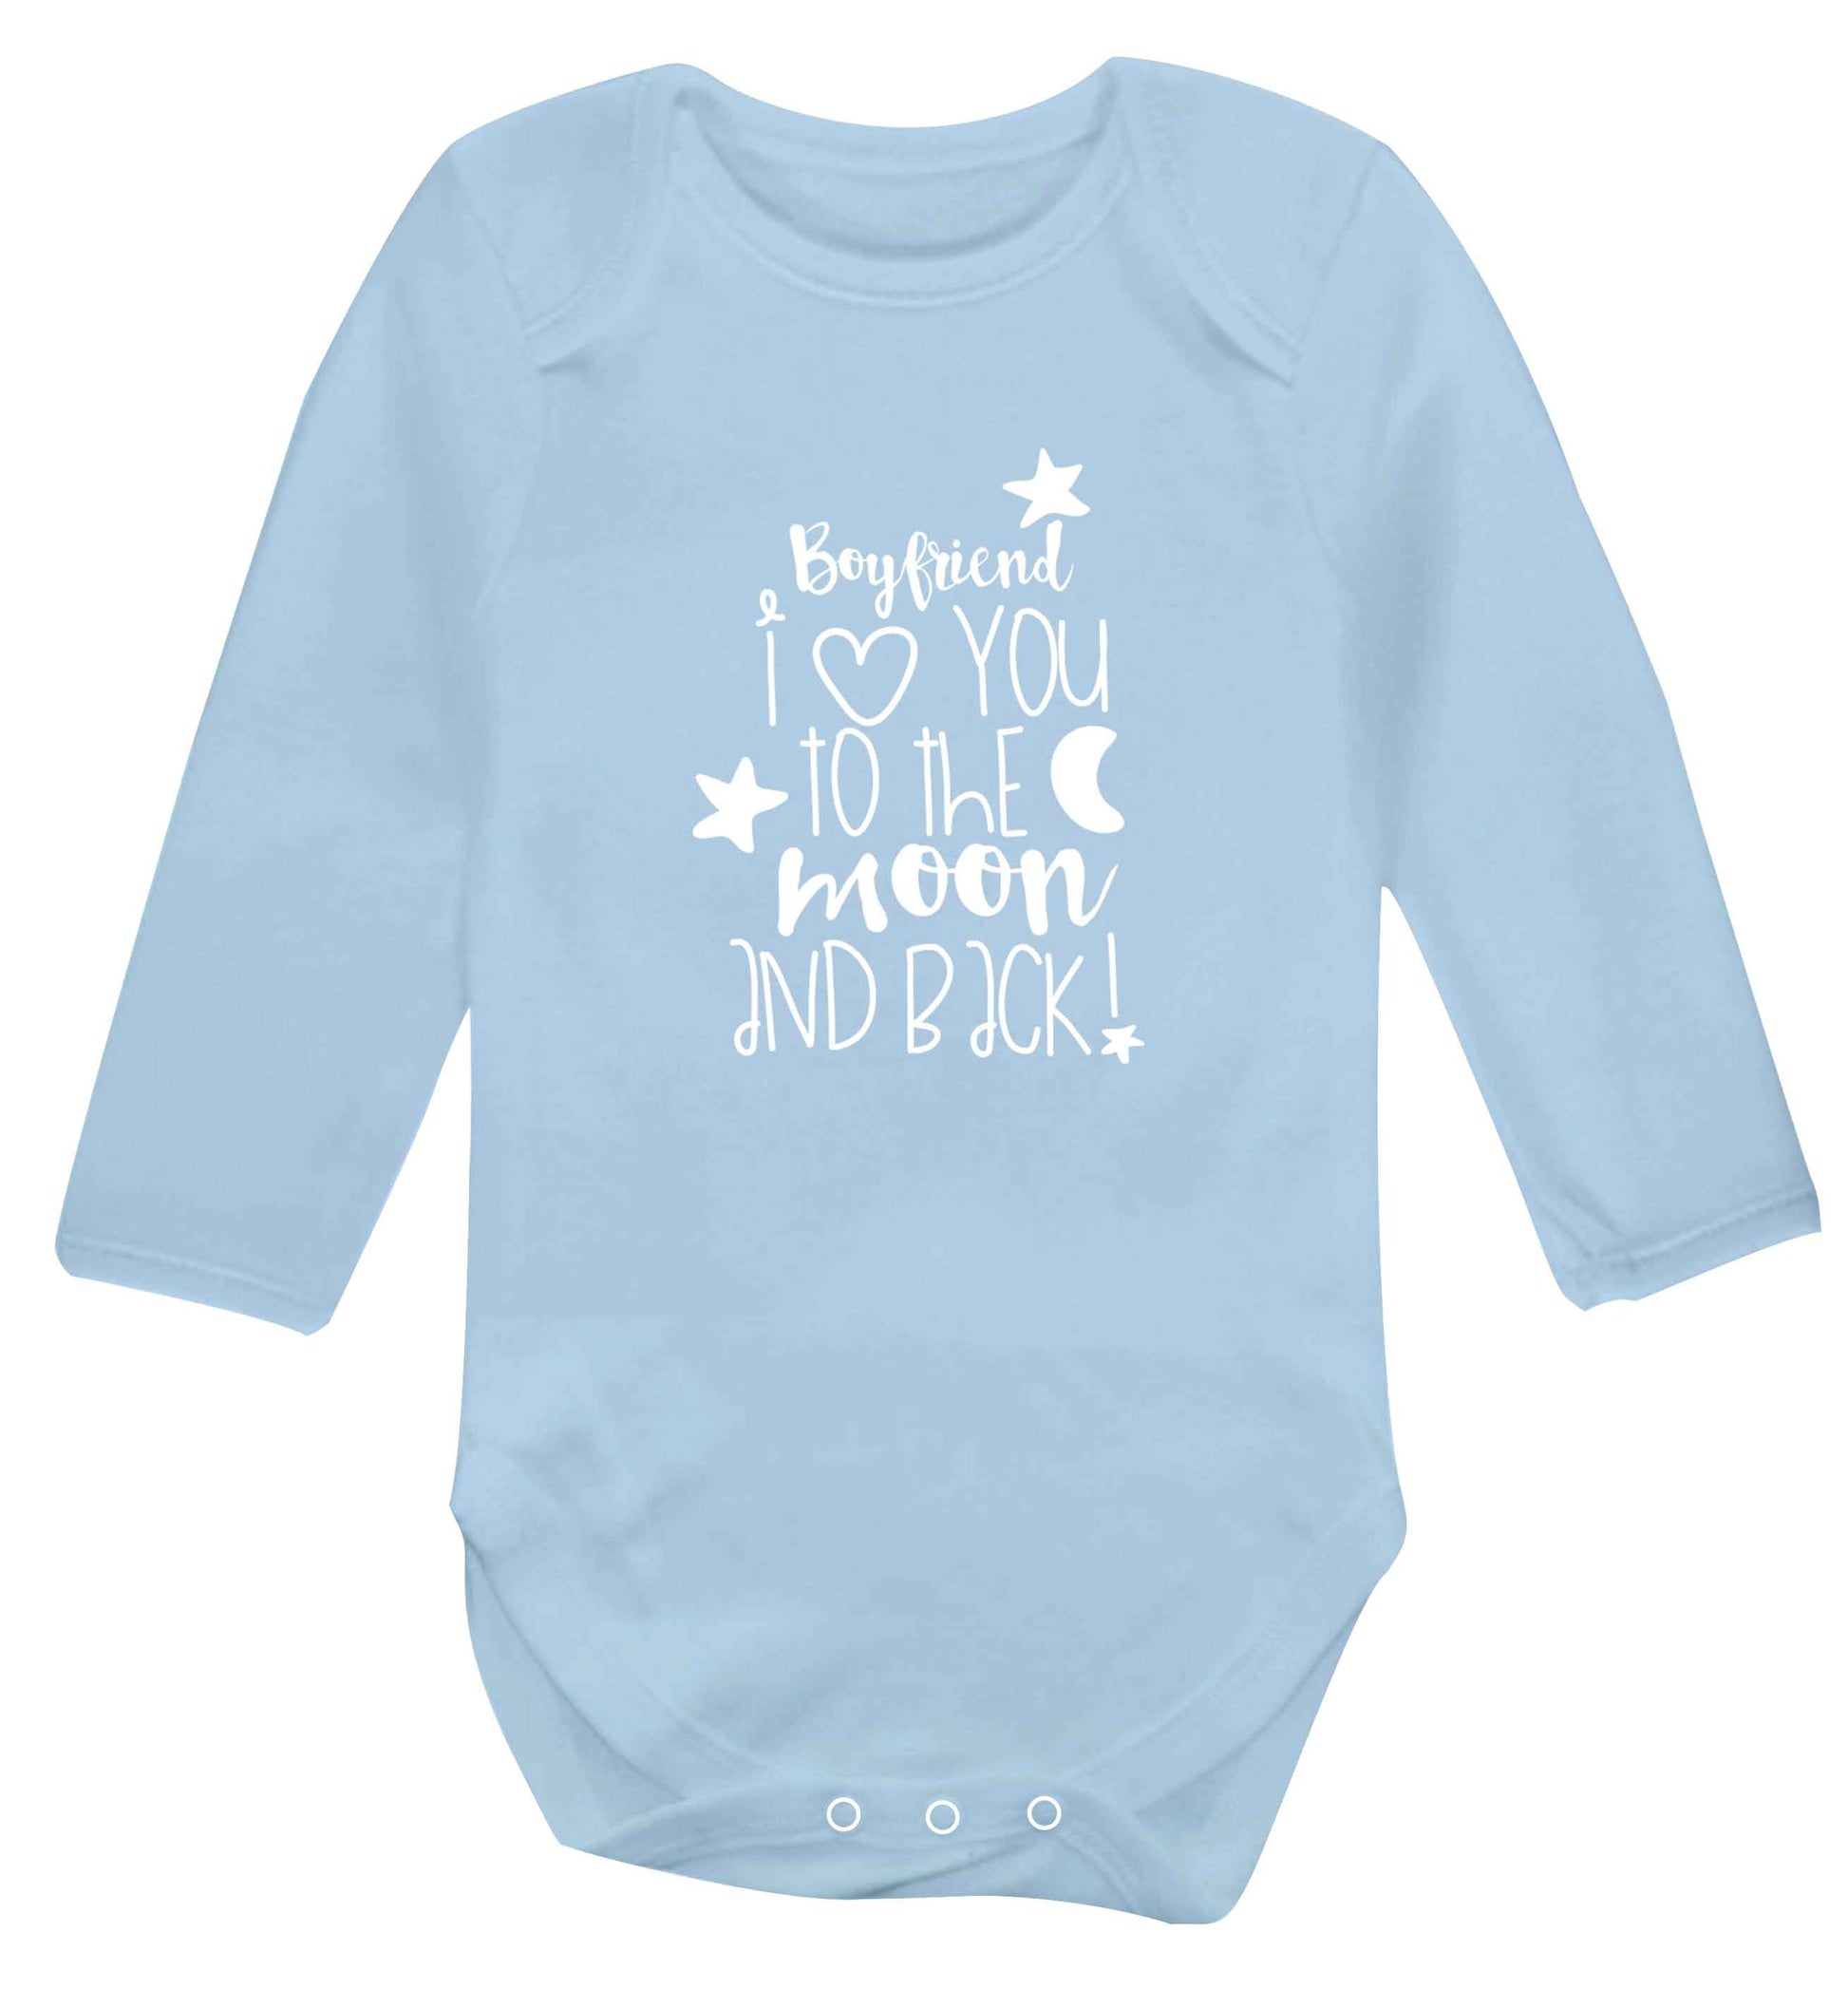 Boyfriend I love you to the moon and back baby vest long sleeved pale blue 6-12 months